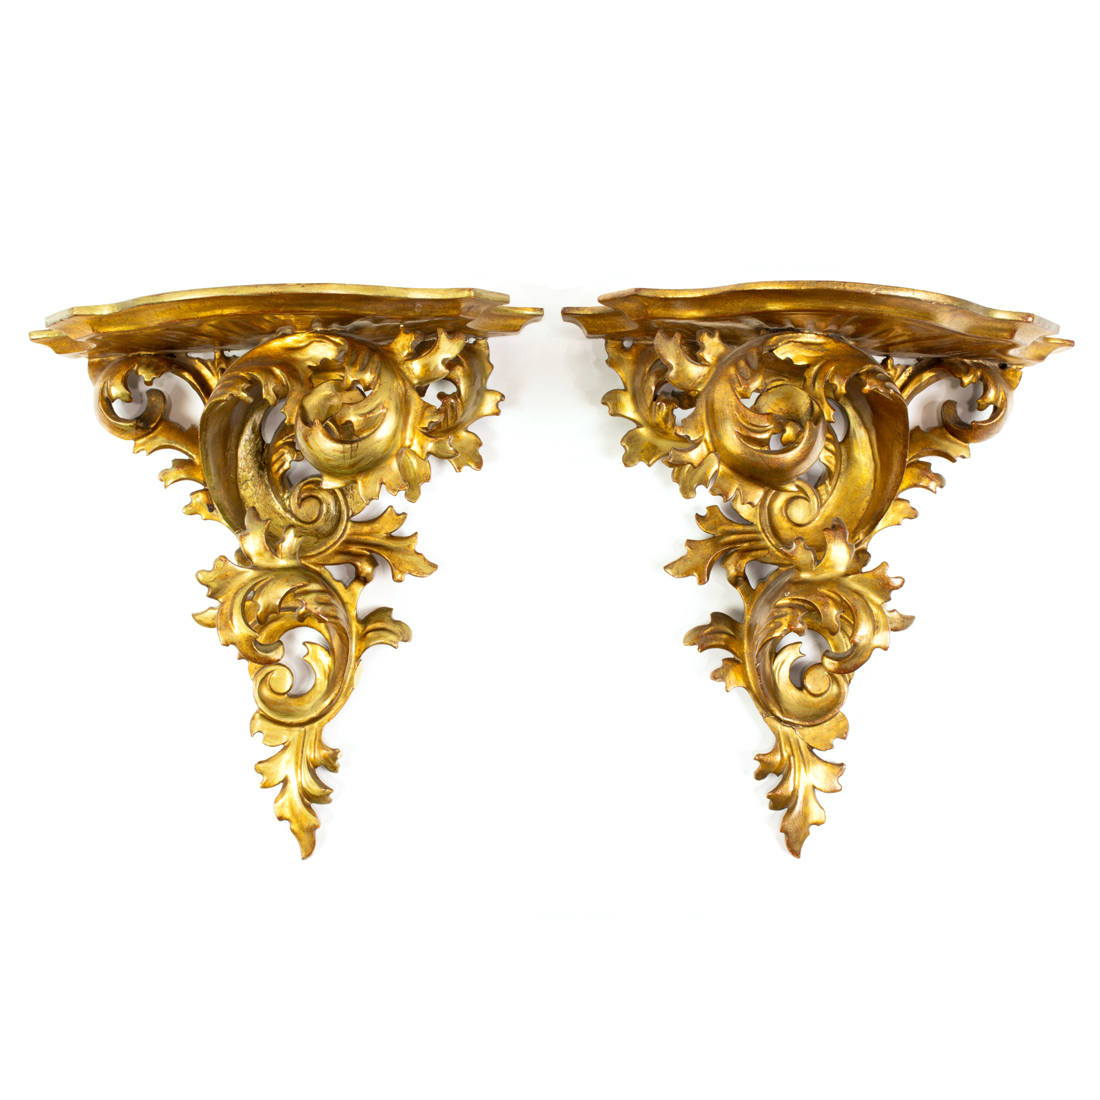 PAIR OF ITALIAN GILTWOOD AND GESSO